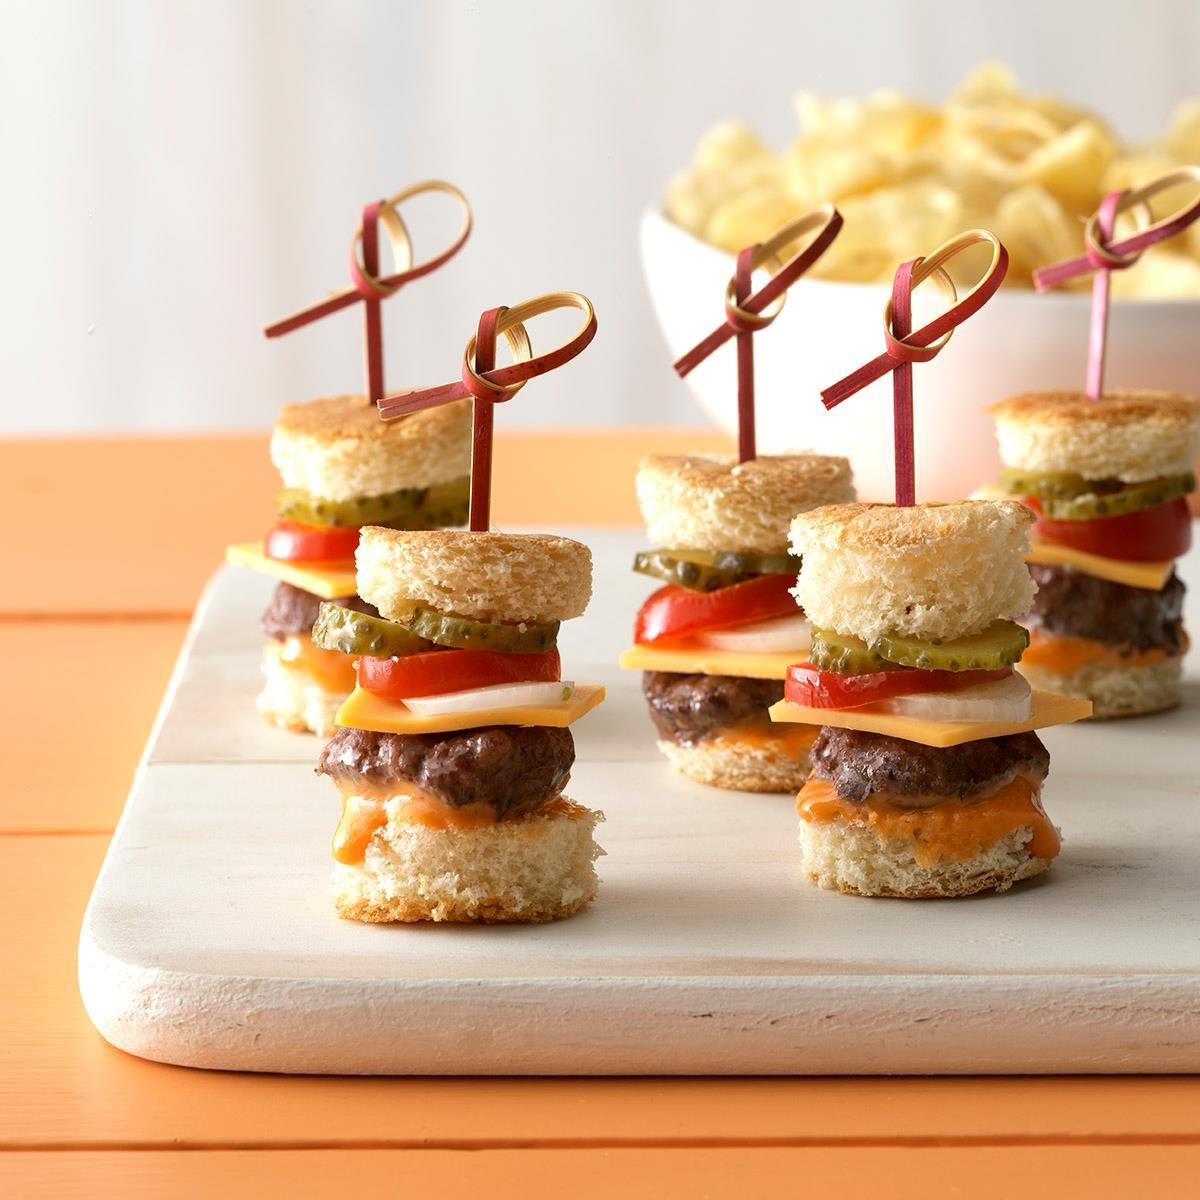 https://www.tasteofhome.com/wp-content/uploads/2018/01/Mini-Burgers-with-the-Works_EXPS_SDAM19_35357_C12_06_4b.jpg